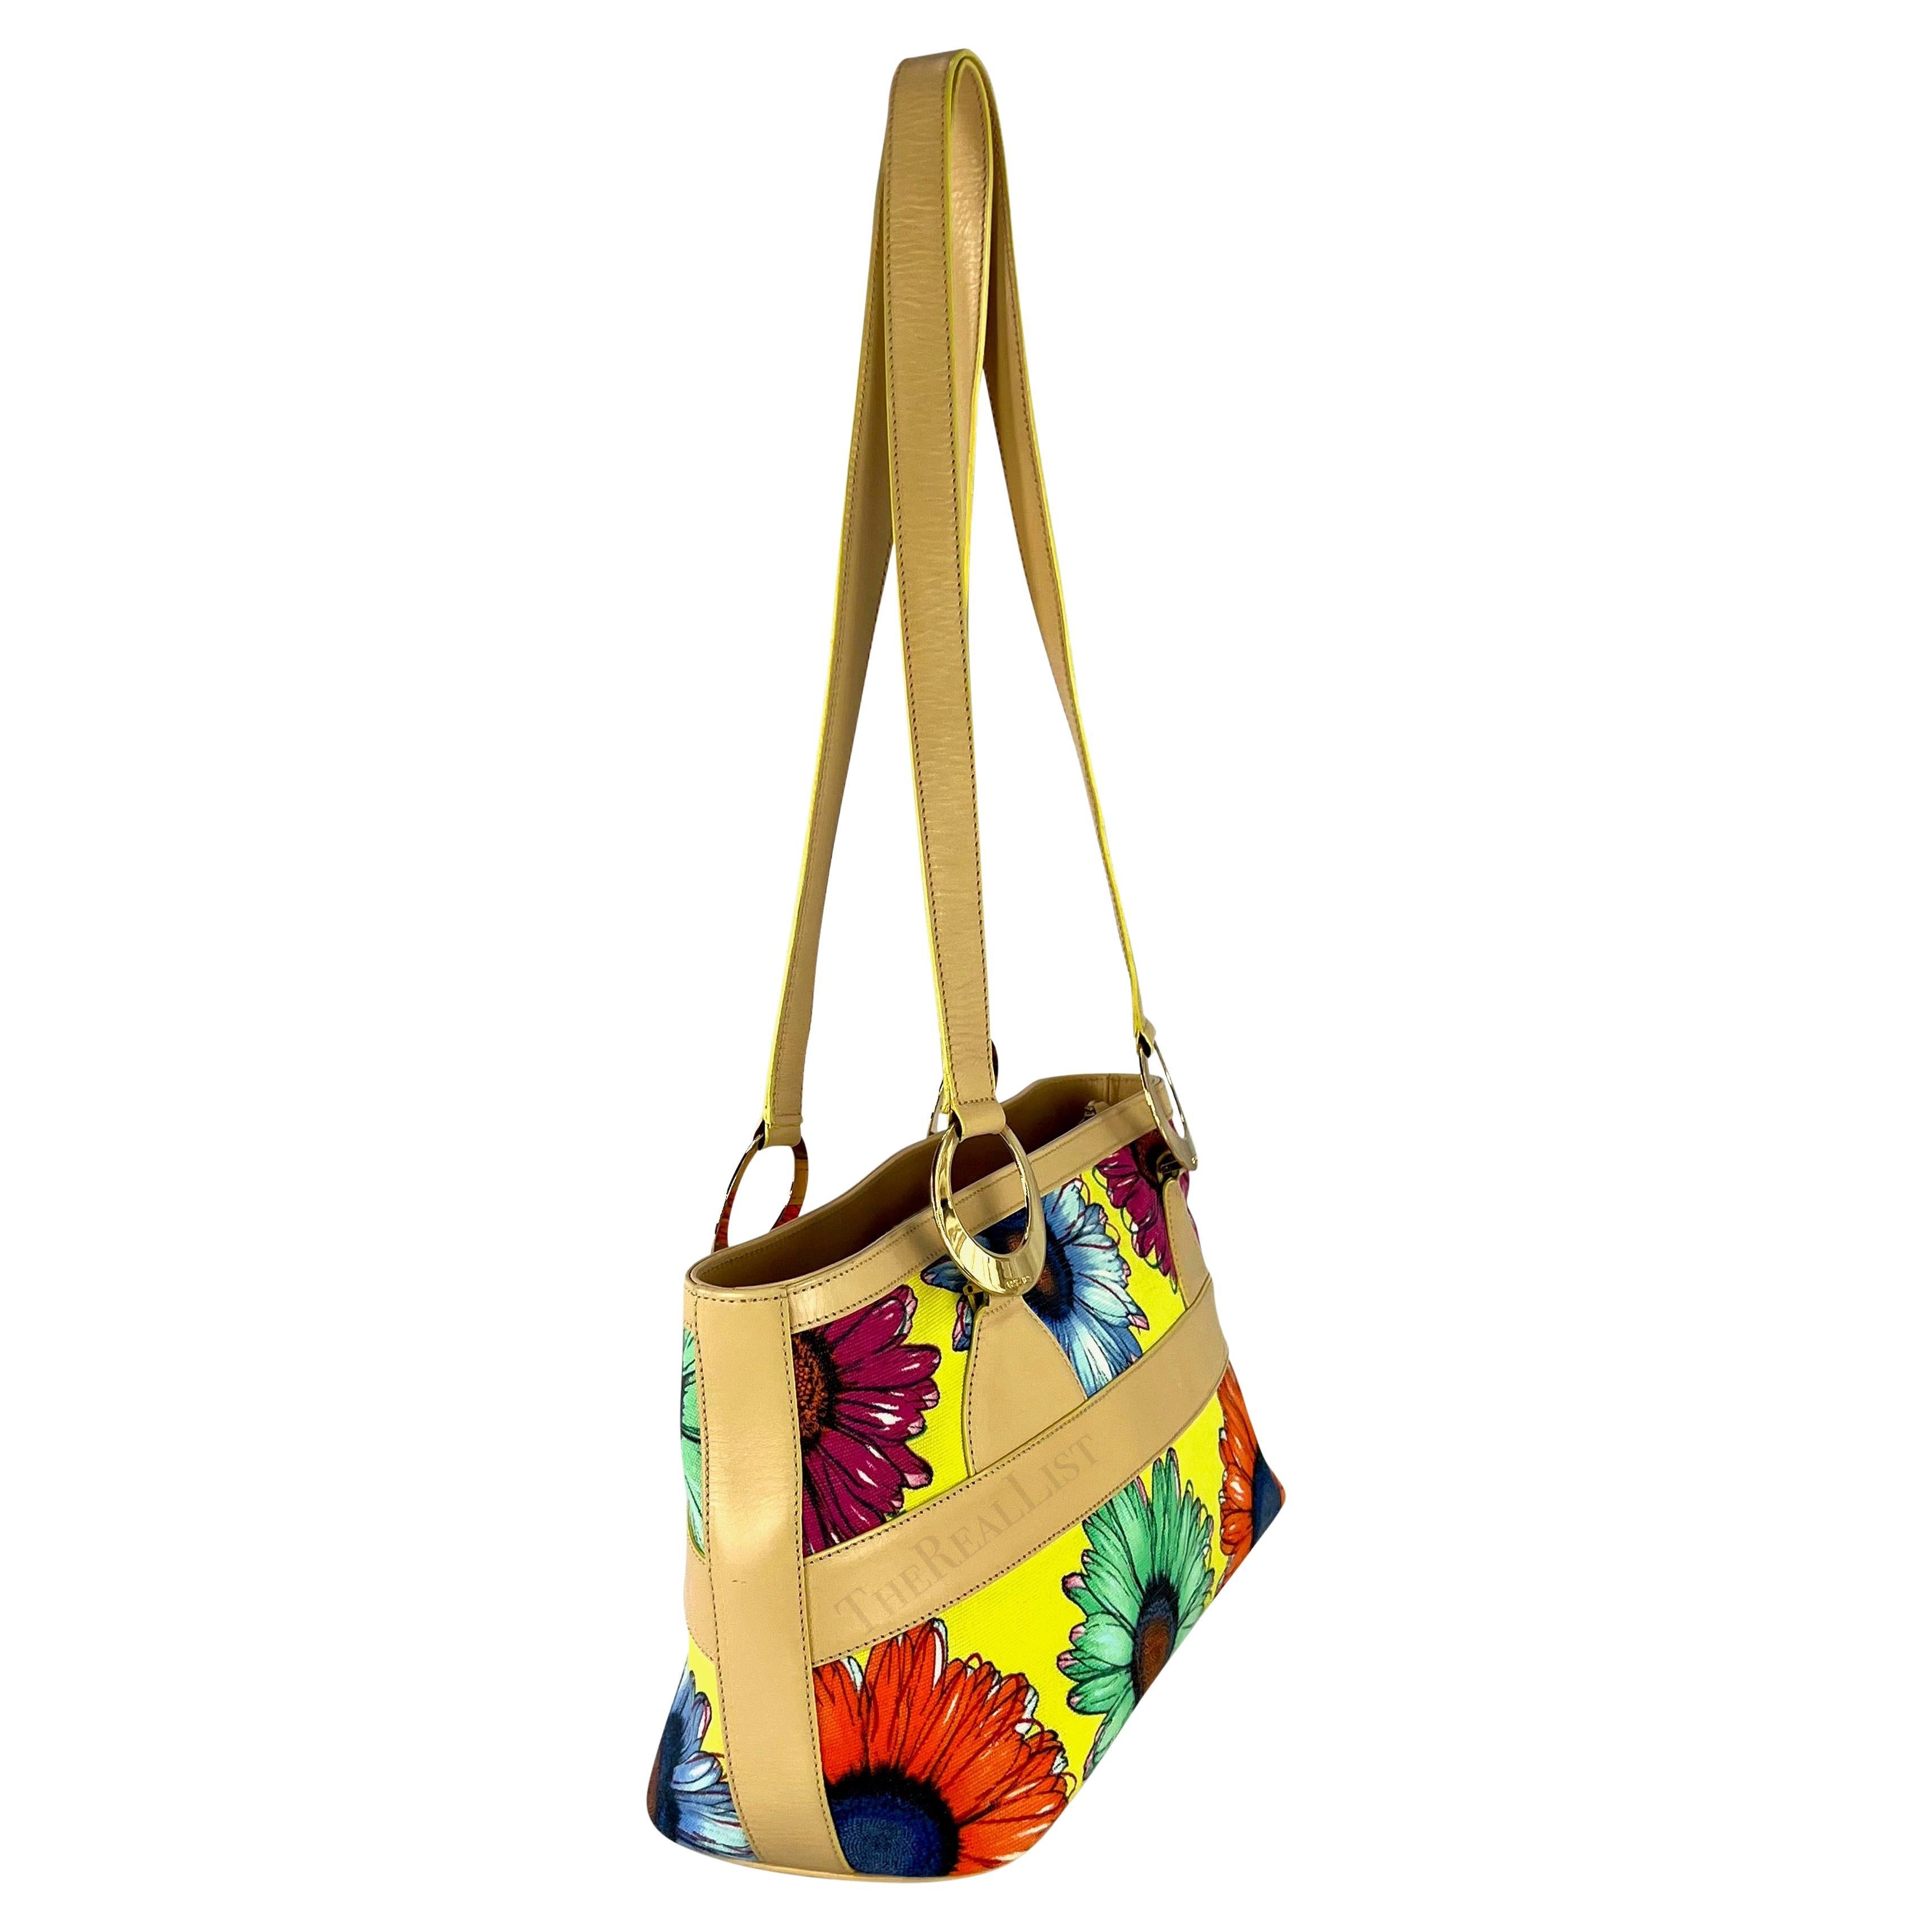 S/S 2002 Gianni Versace by Donatella Floral Pop Art Print Shoulder Bag In Excellent Condition For Sale In West Hollywood, CA